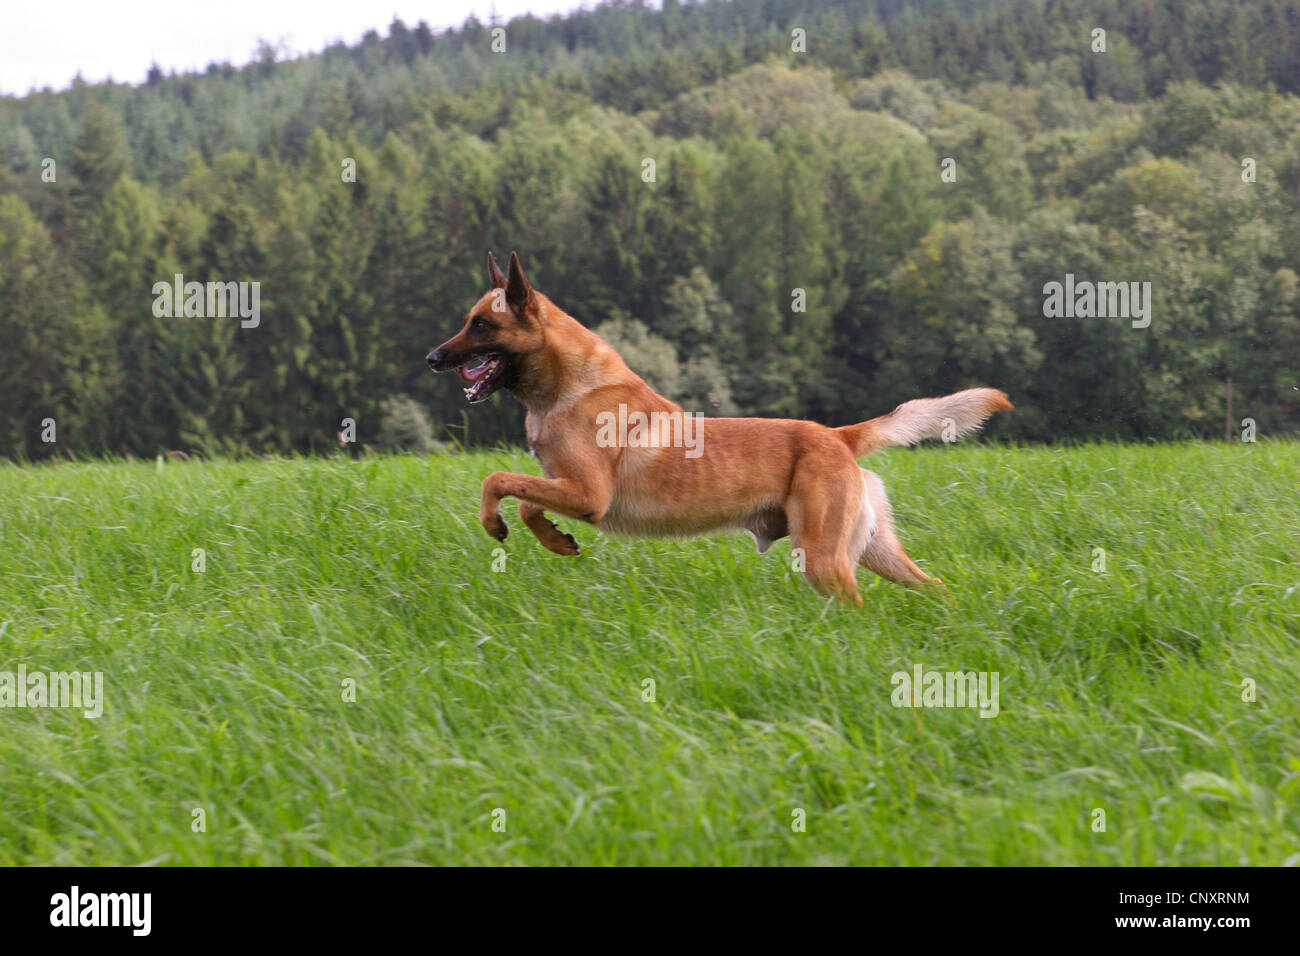 Malinois (Canis lupus f. familiaris), running over a meadow Stock Photo